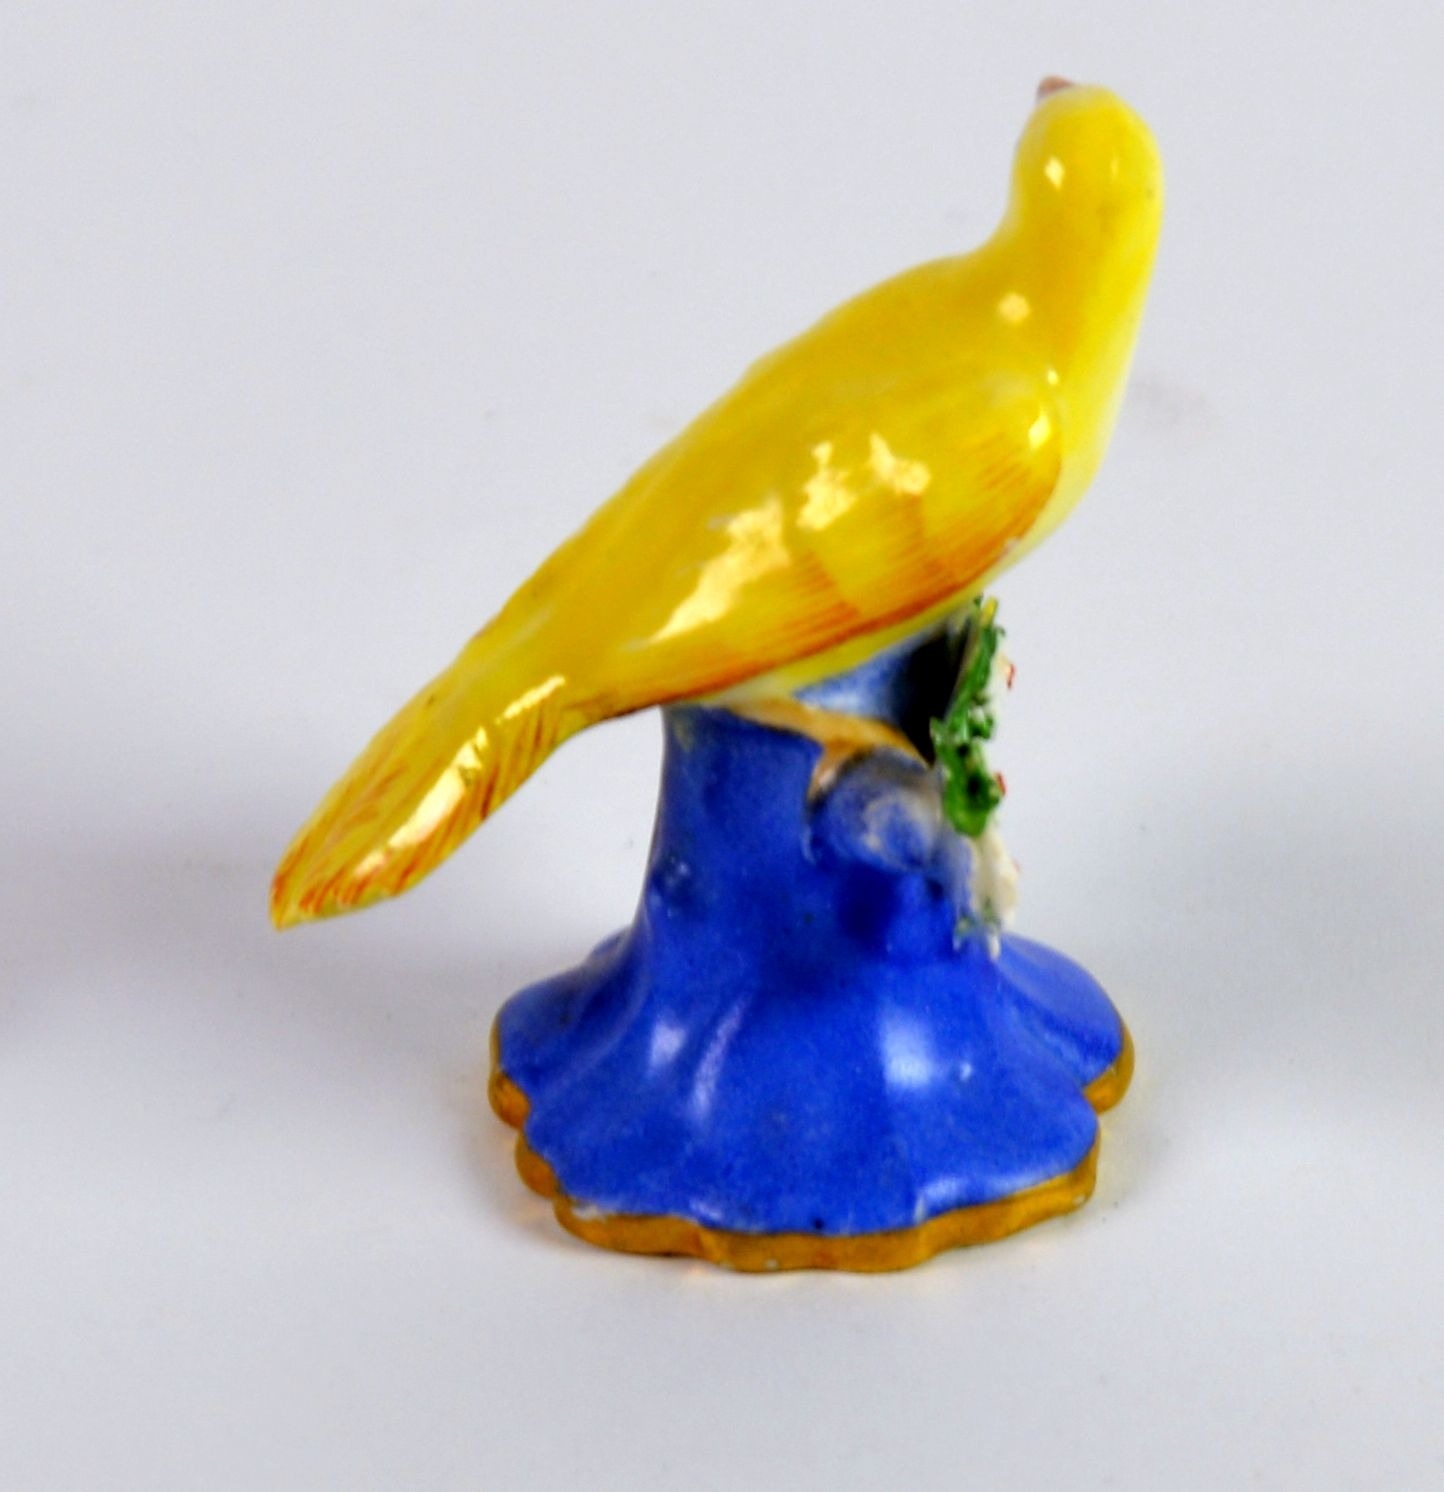 CHAMBERLAIN’S WORCESTER PORCELAIN MODEL OF A YELLOW BIRD, painted In colours and modelled perched on - Image 2 of 3